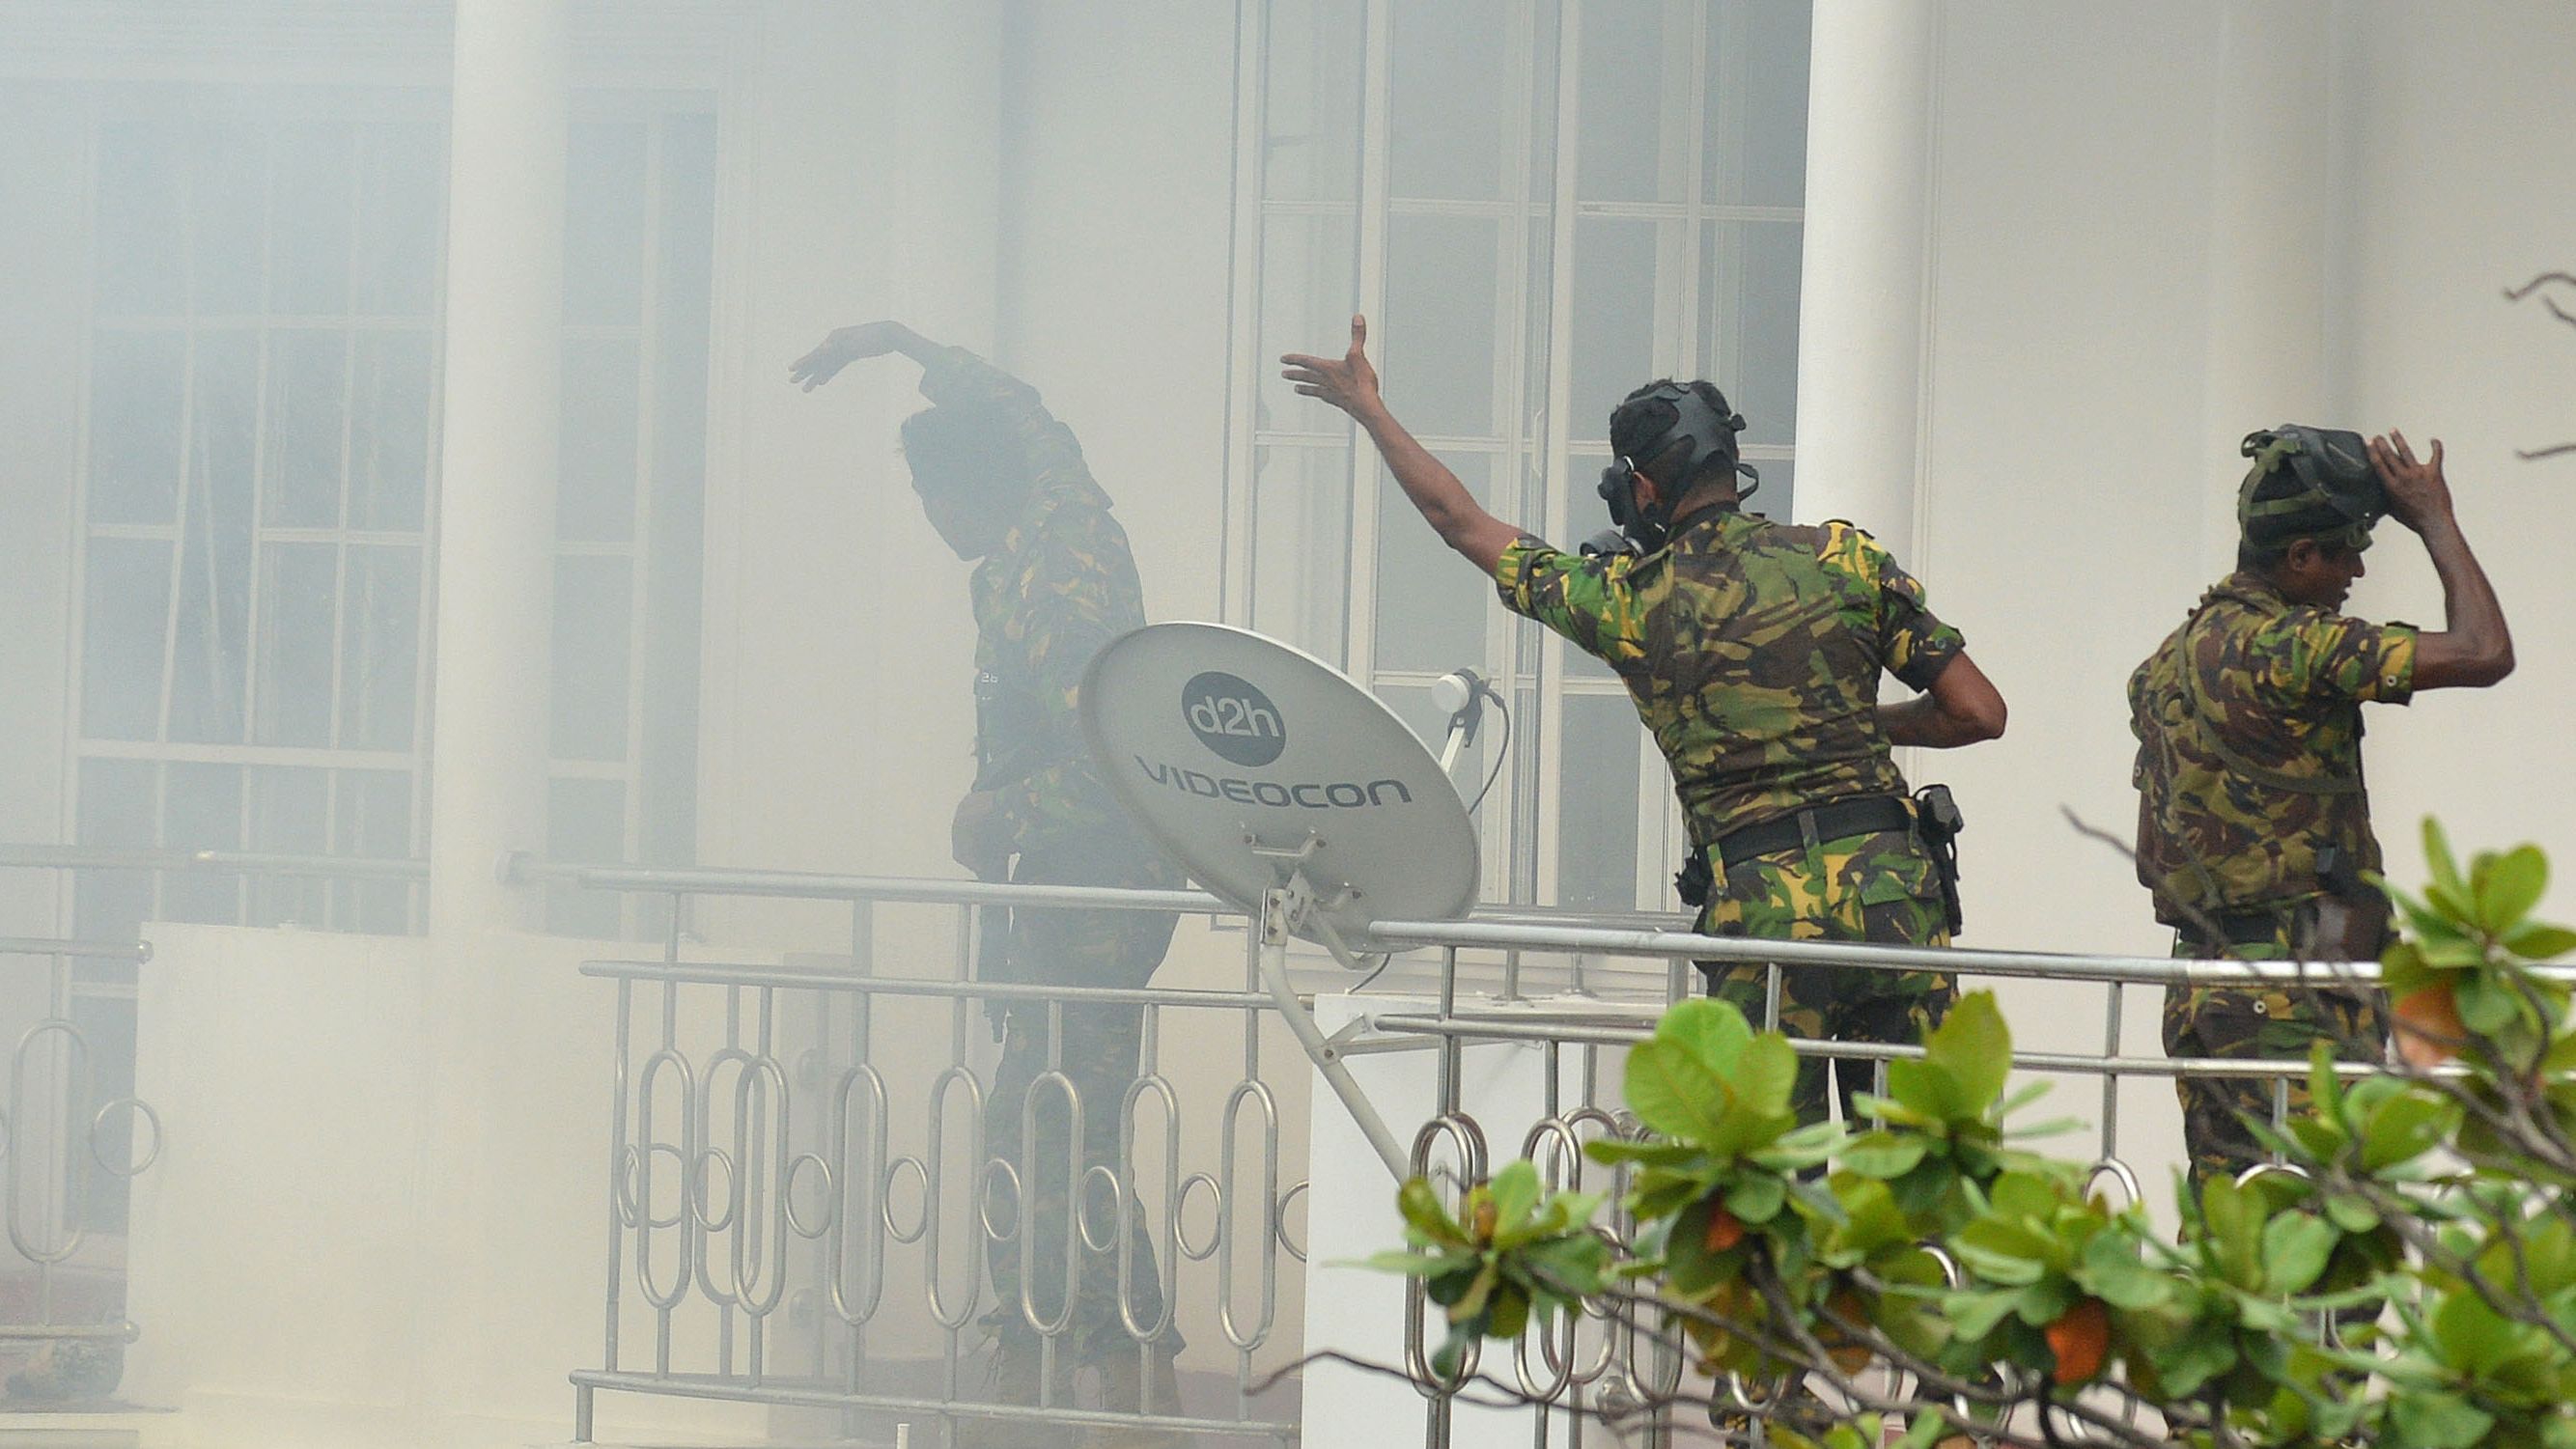 Sri Lankan Special Task Force personnel gesture outside a house during a raid following an explosion at a property in the Orugodawatta district of Colombo.